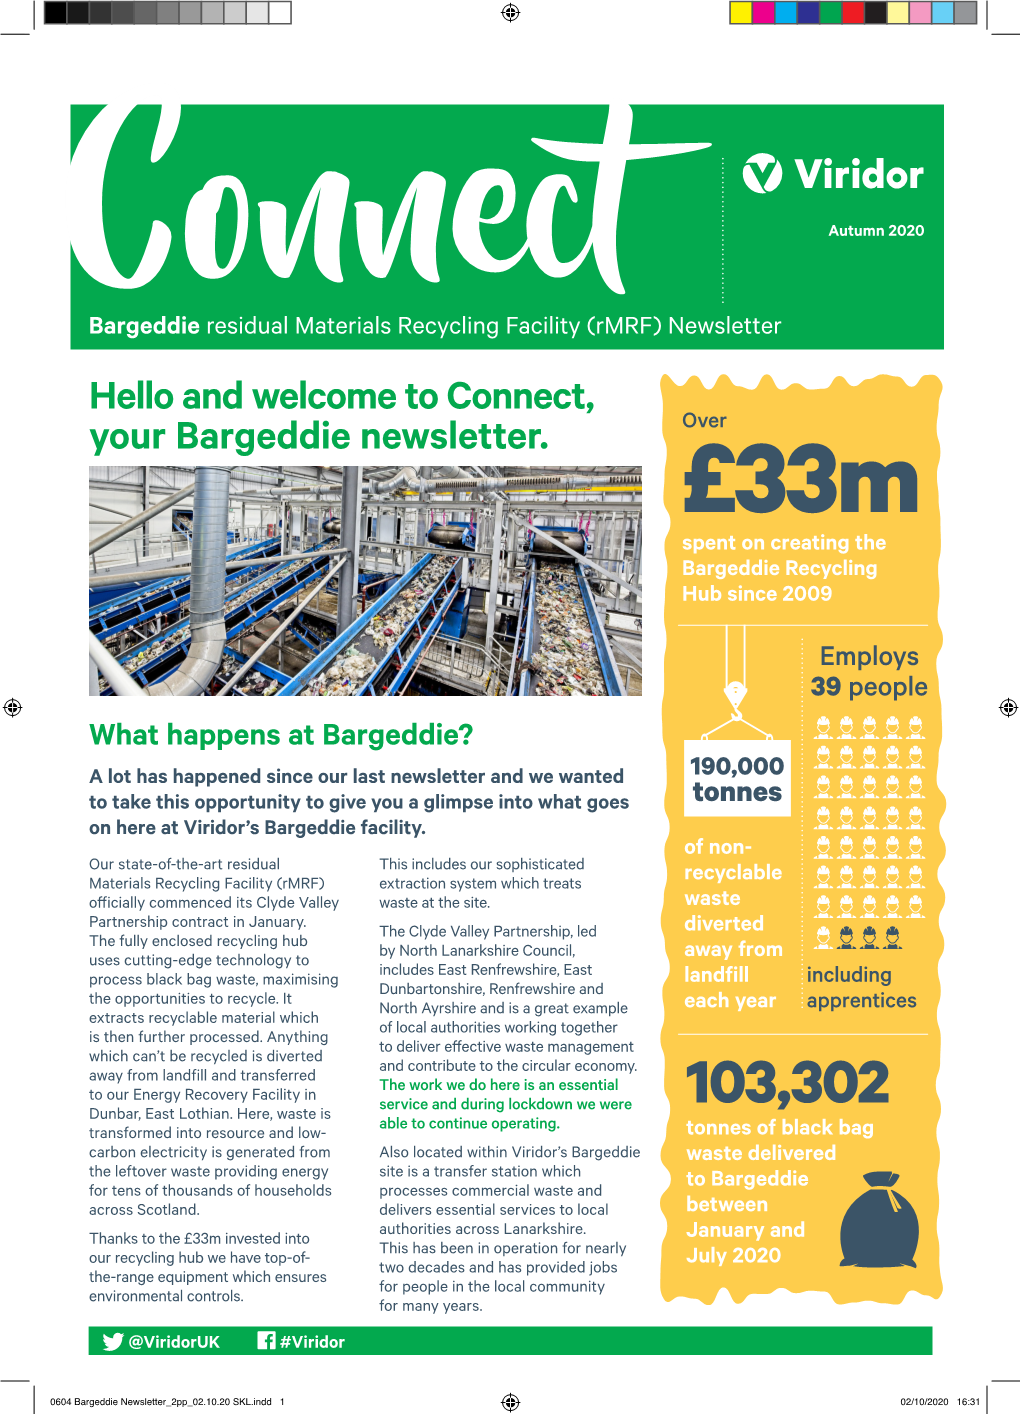 Bargeddie Residual Materials Recycling Facility (Rmrf) Newsletter Hello and Welcome to Connect, Over Your Bargeddie Newsletter